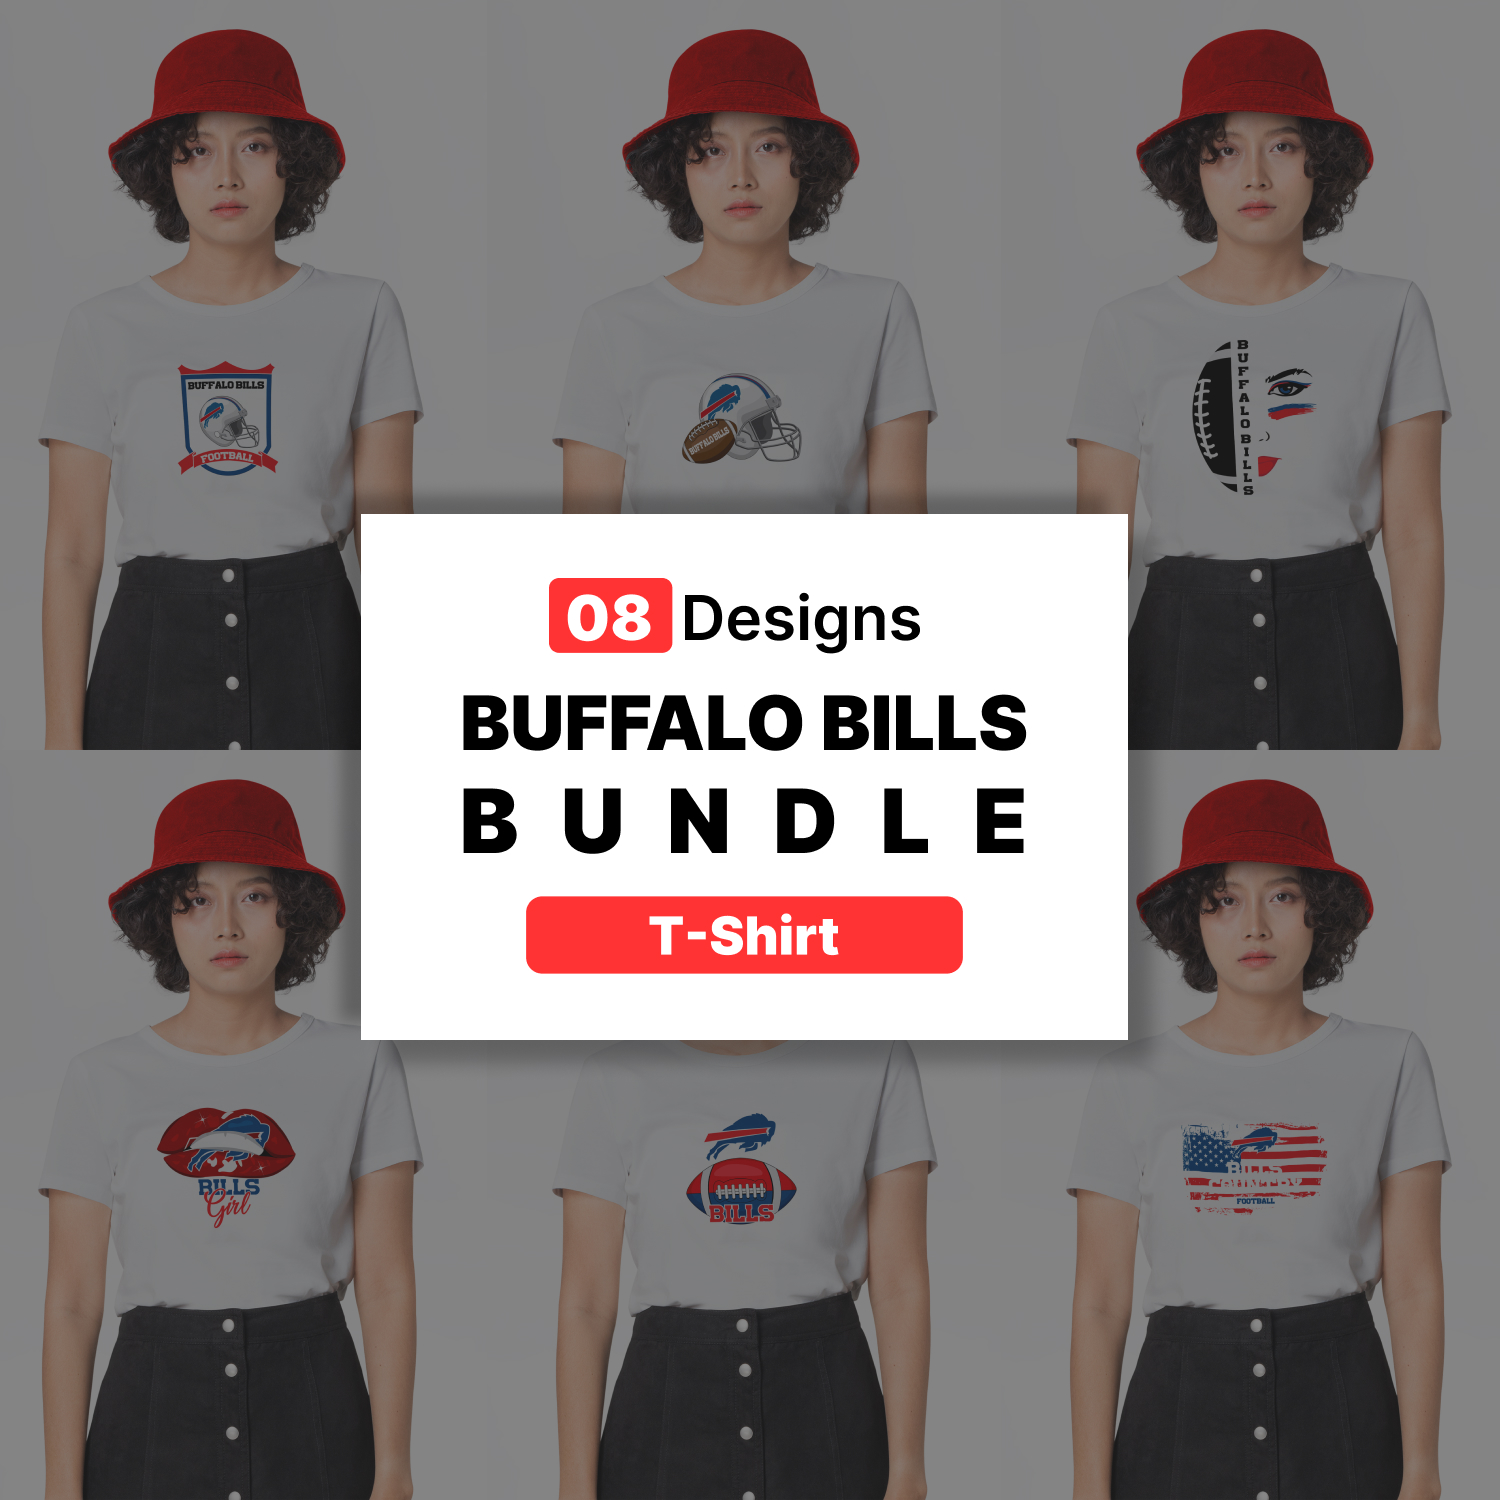 Images with buffalo bills.